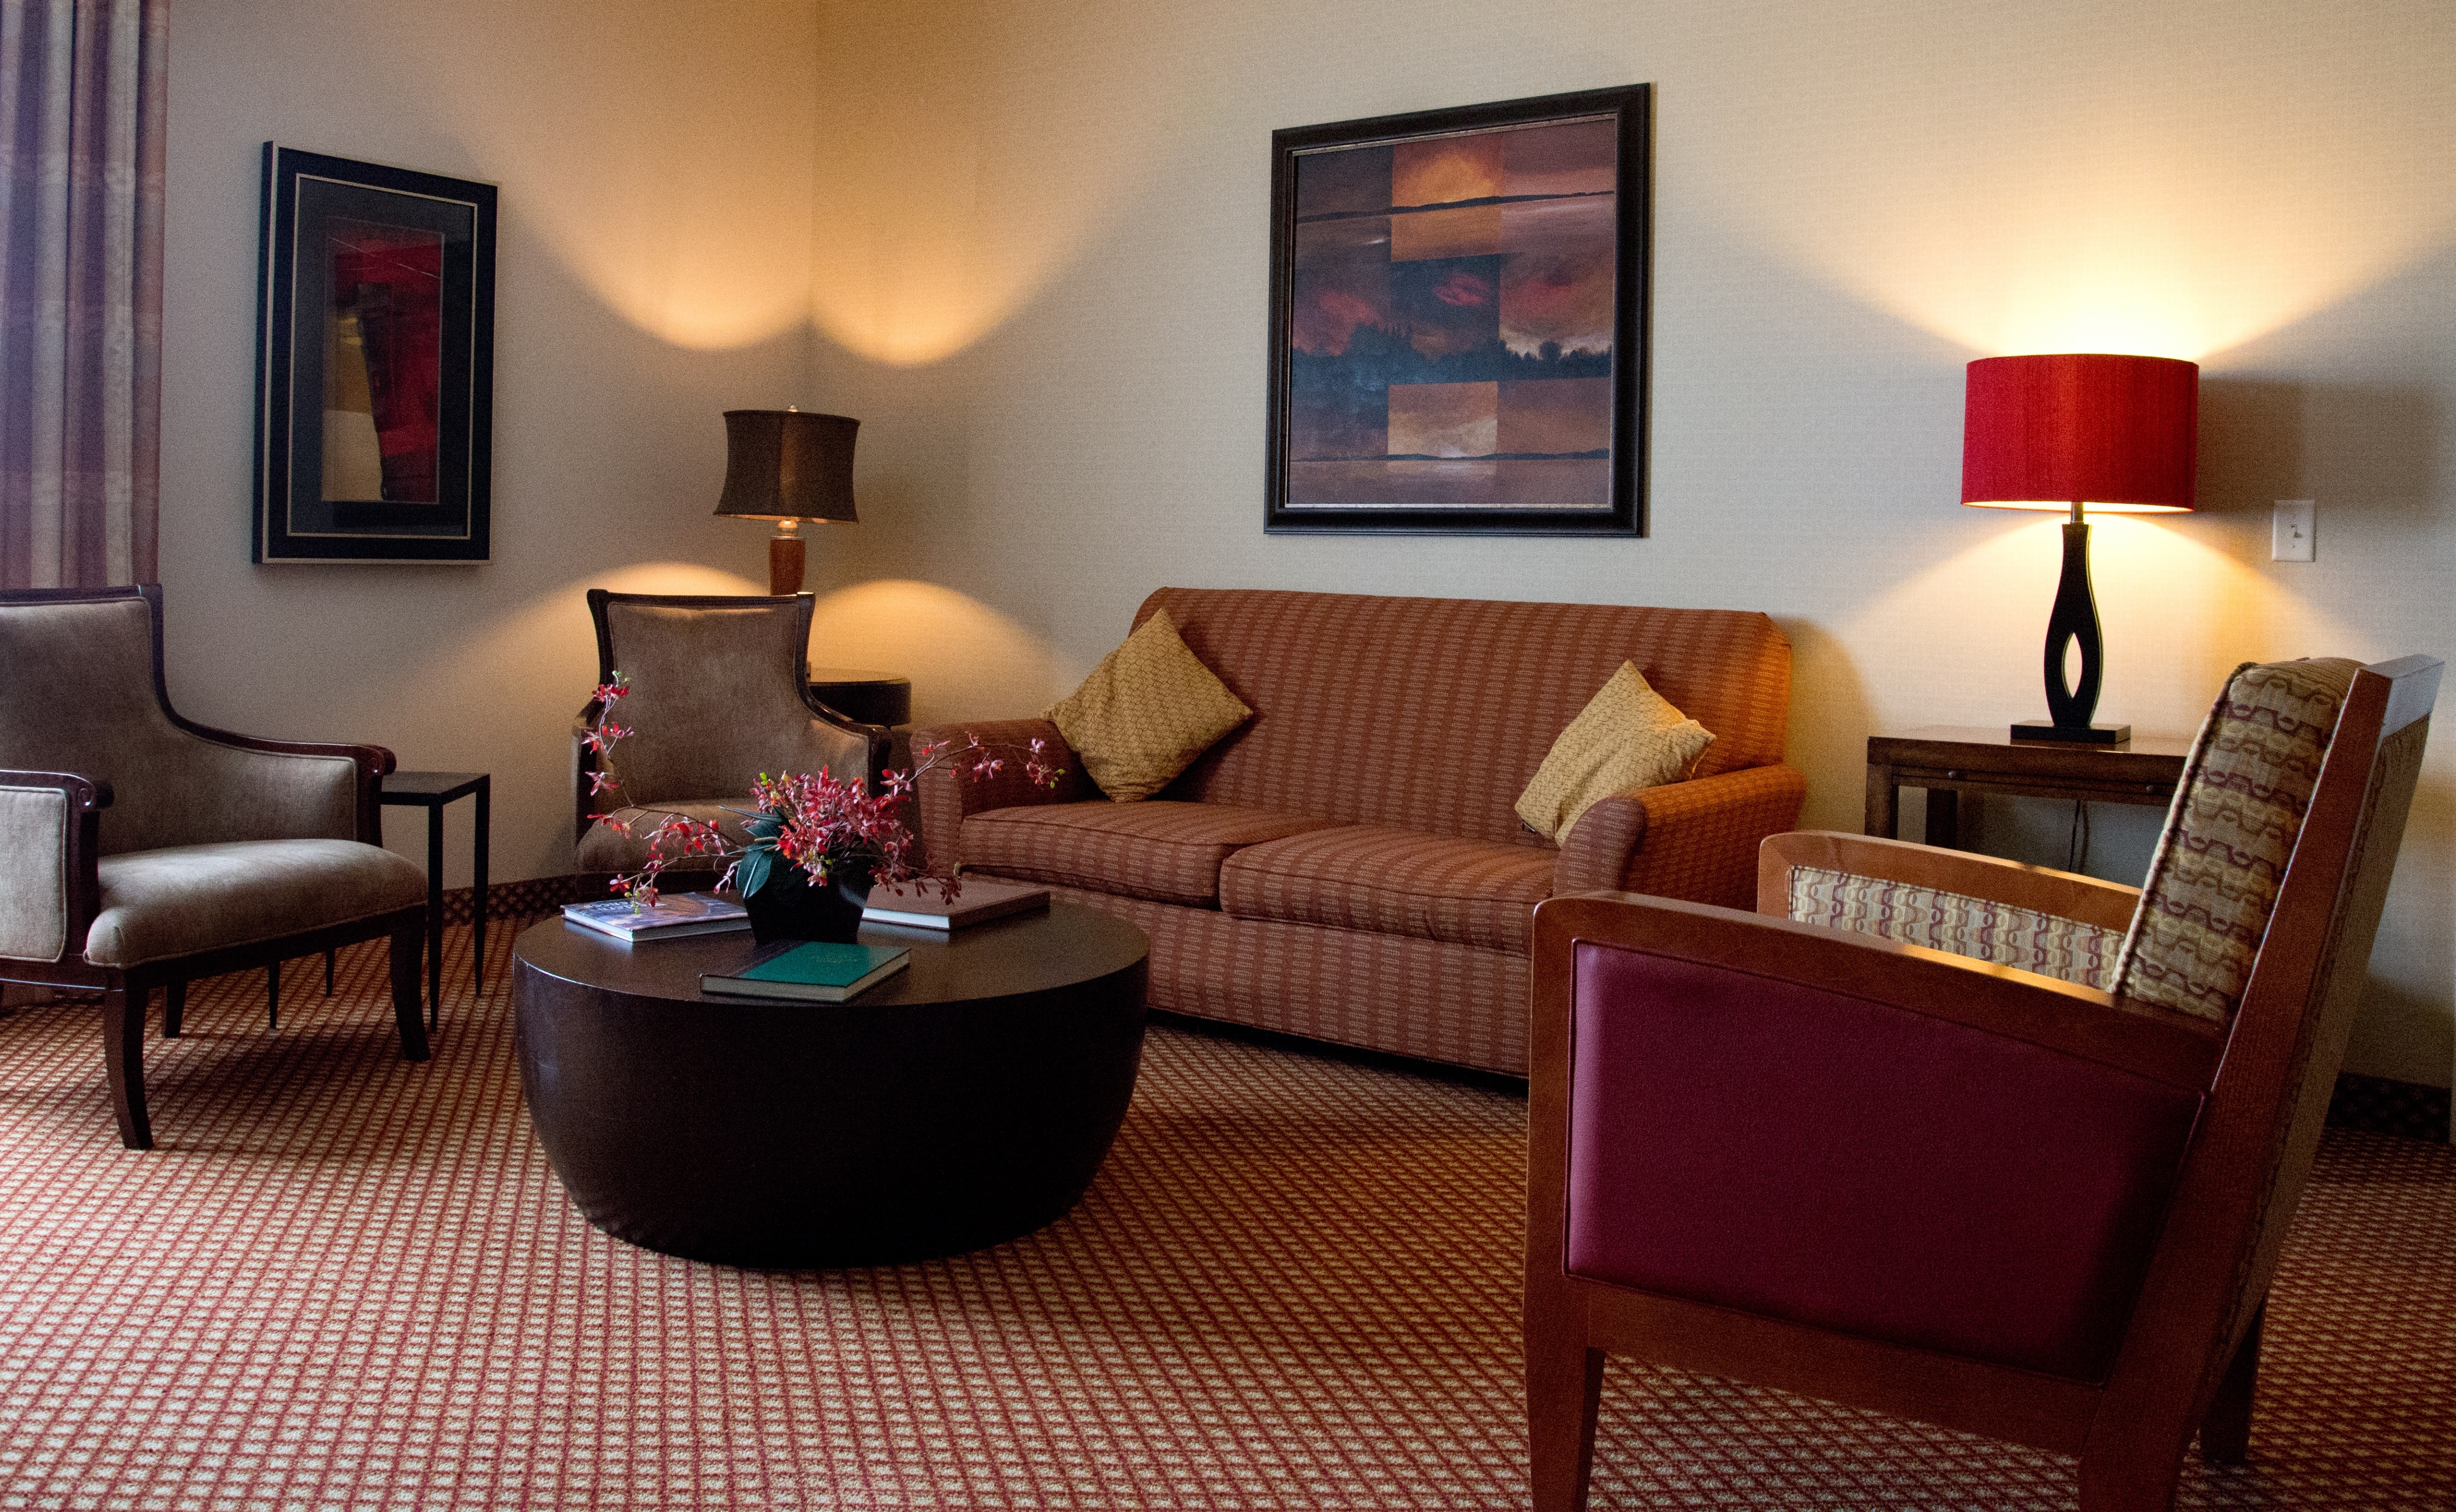 Executive Suite Living Area With Arm Chairs, Sofa, Wall Art, Lamps and Round Coffee Table